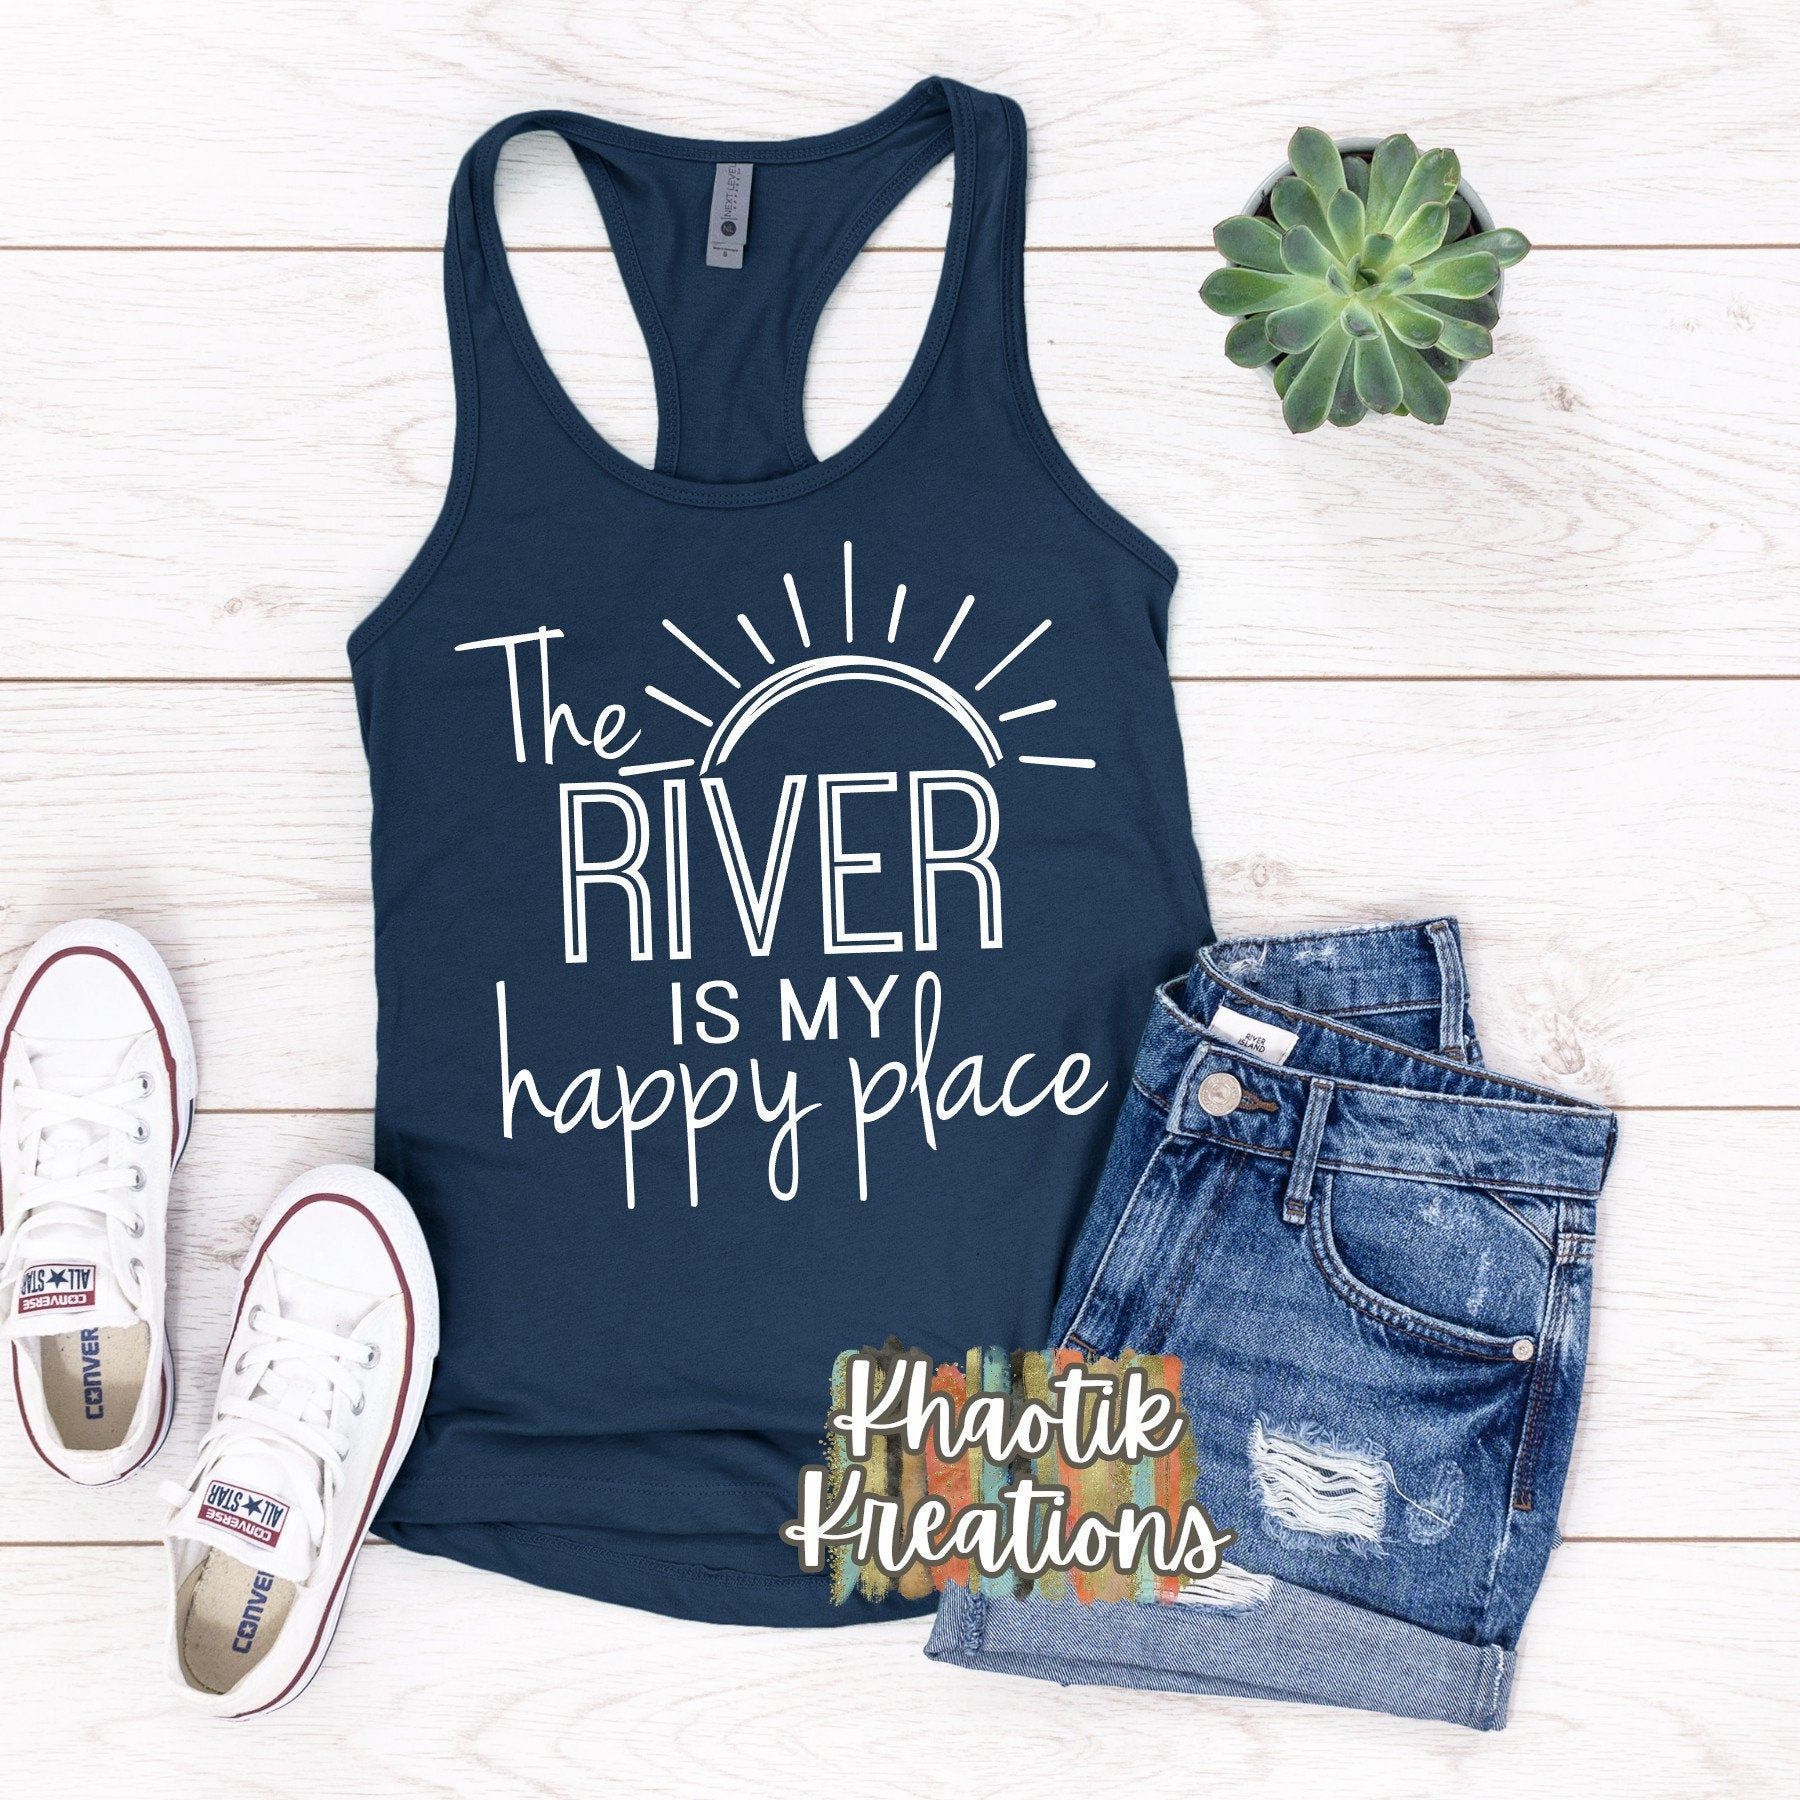 The River is my Happy Place Svg, River Svg, River Life Svg, Summer Svg, Vacation Svg, Summer Svg Designs, River Svg Design, Cricut Cut Files - The River is my Happy Place Svg, River Svg, River Life Svg, Summer Svg, Vacation Svg, Summer Svg Designs, River Svg Design, Cricut Cut Files -   19 summer fitness Design ideas